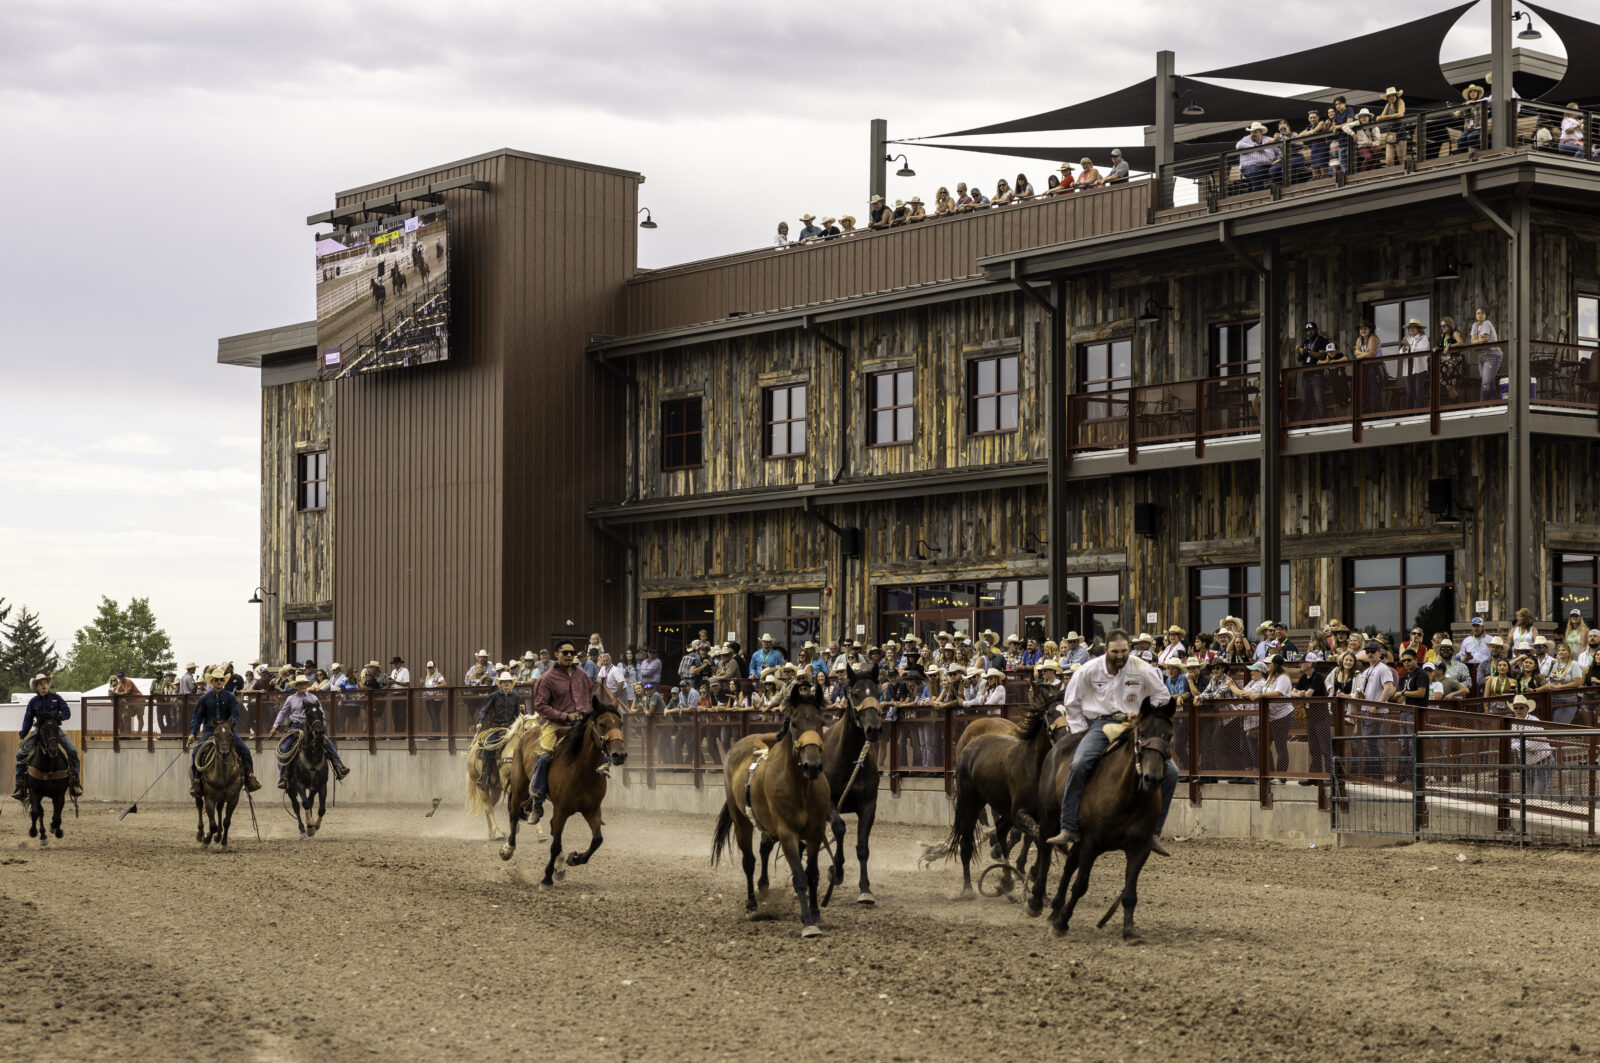 The Rodeo: Wild Horse Race